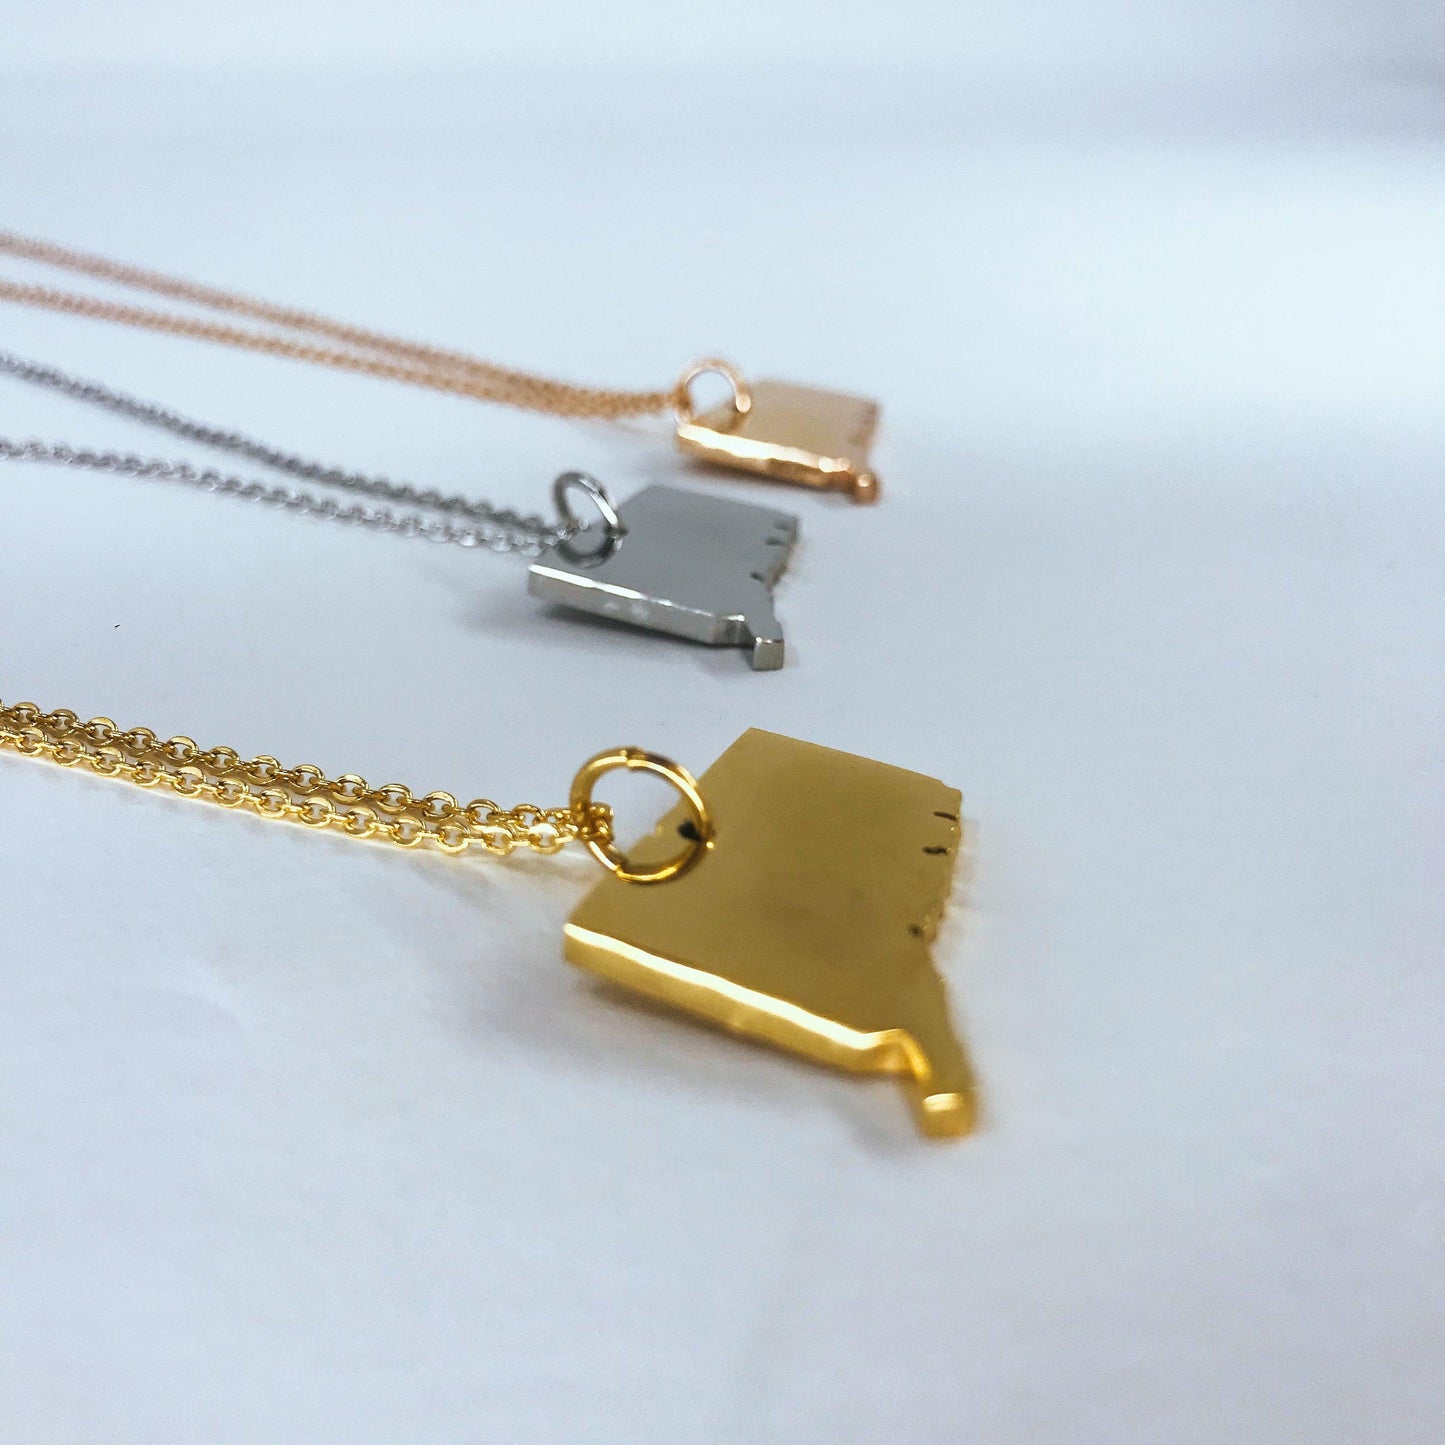 Connecticut State Silhouette Necklaces in 3 different colors: Gold, Silver & Rose Gold